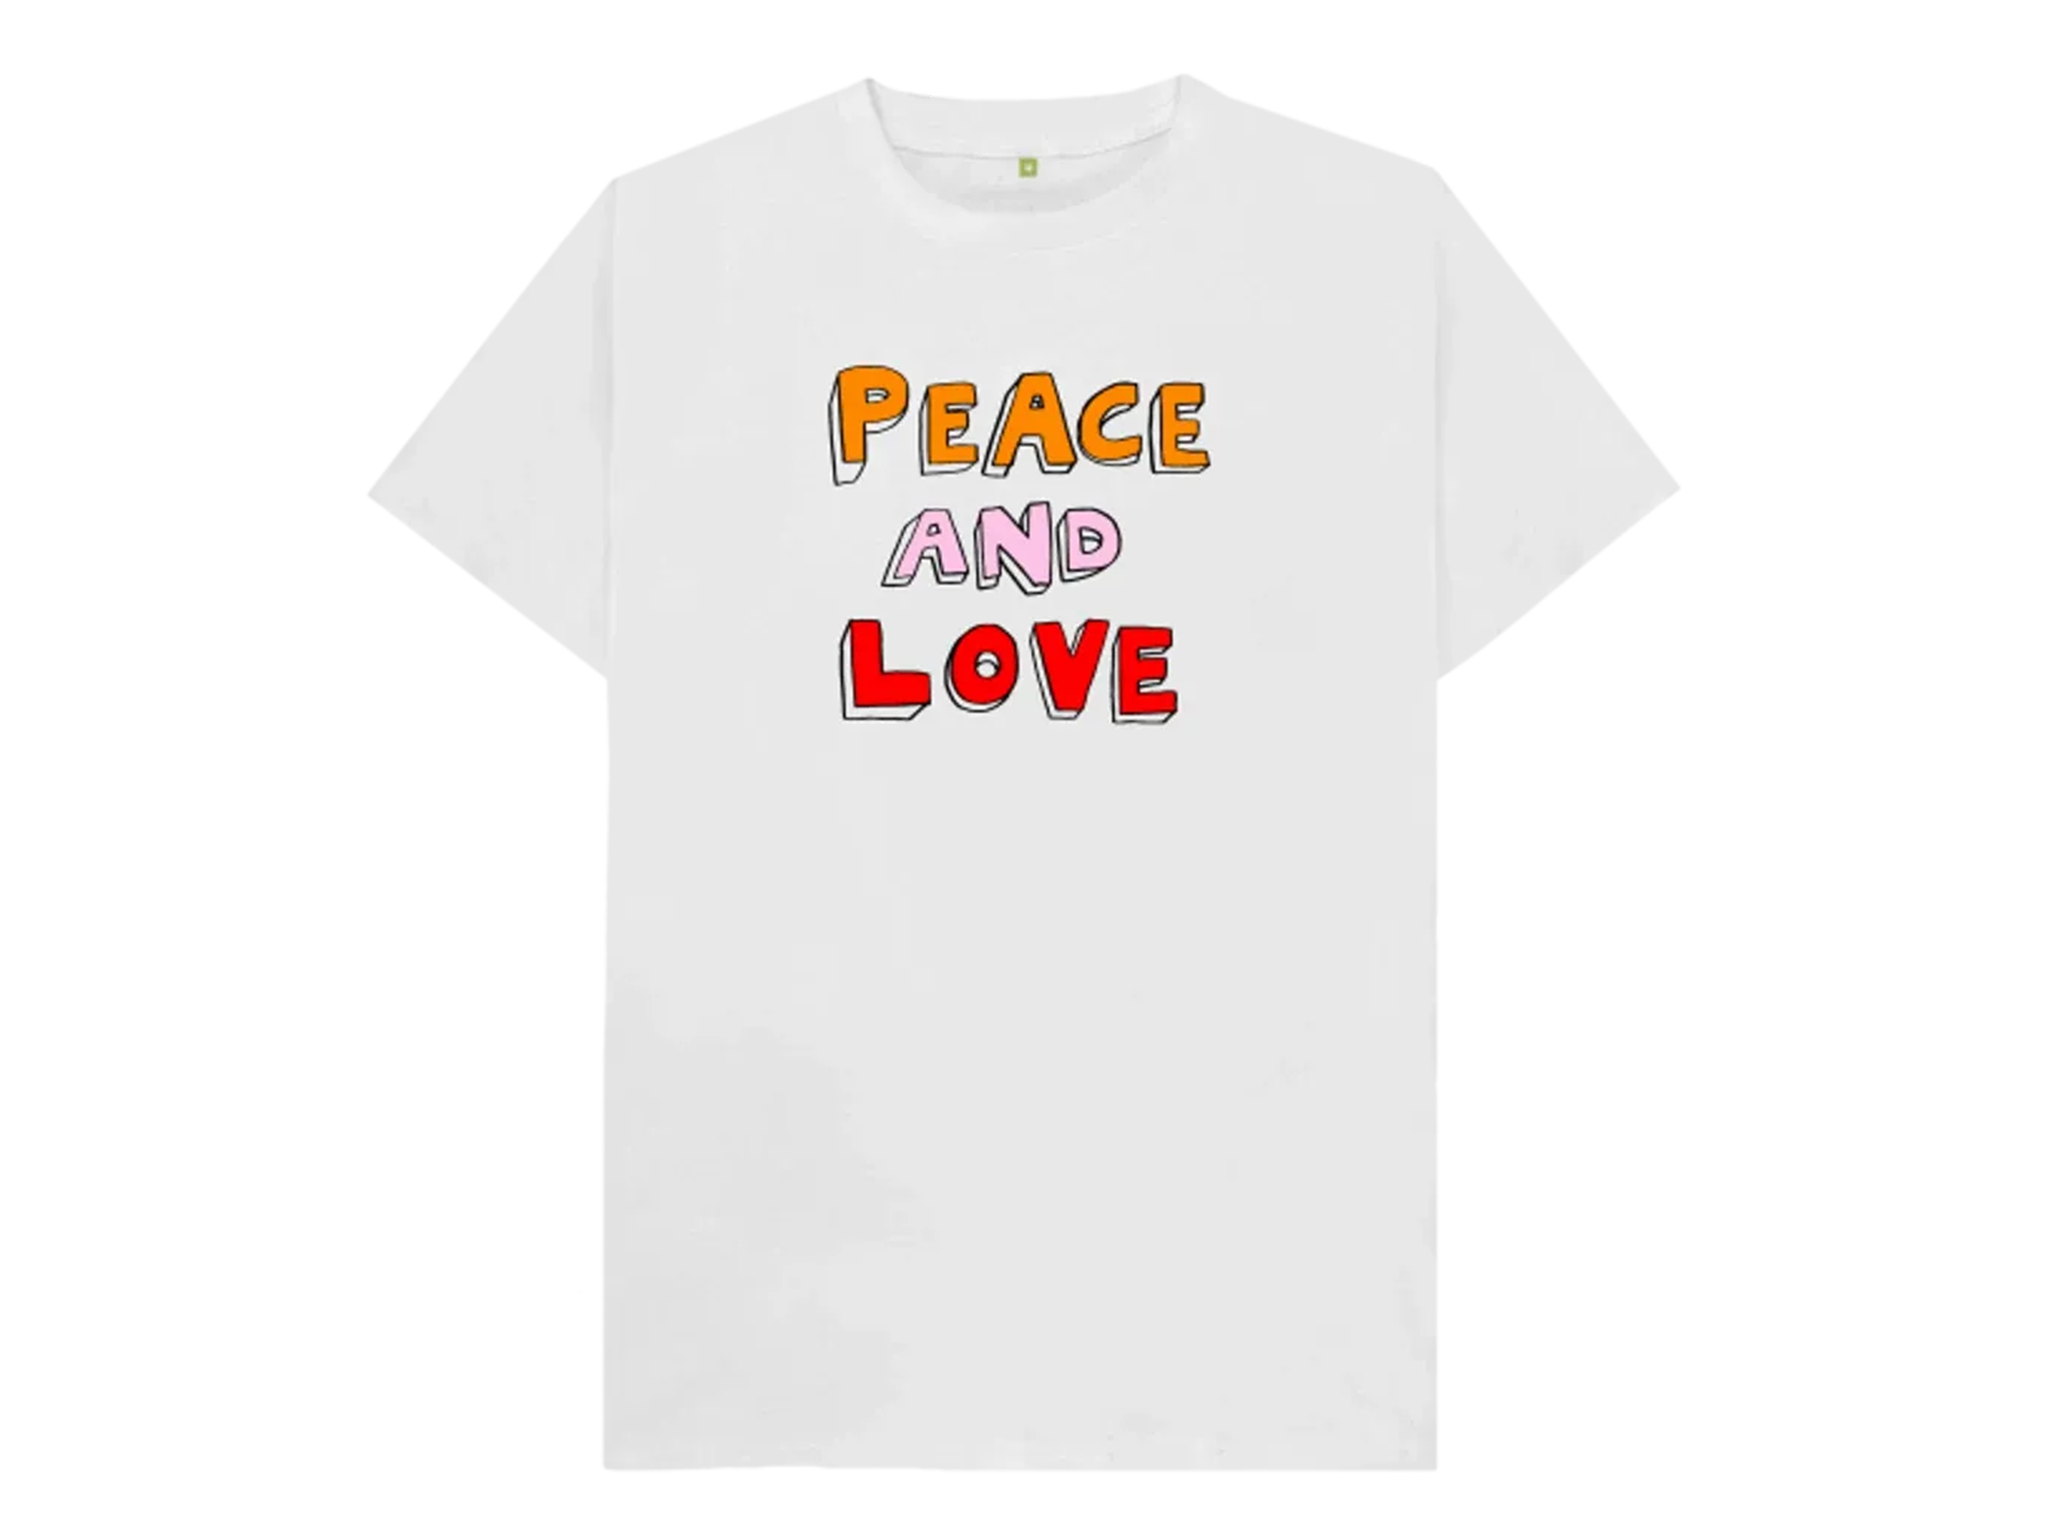 bella-freud-peace-and-love-t-shirt-indybest-charity-christmas-gift